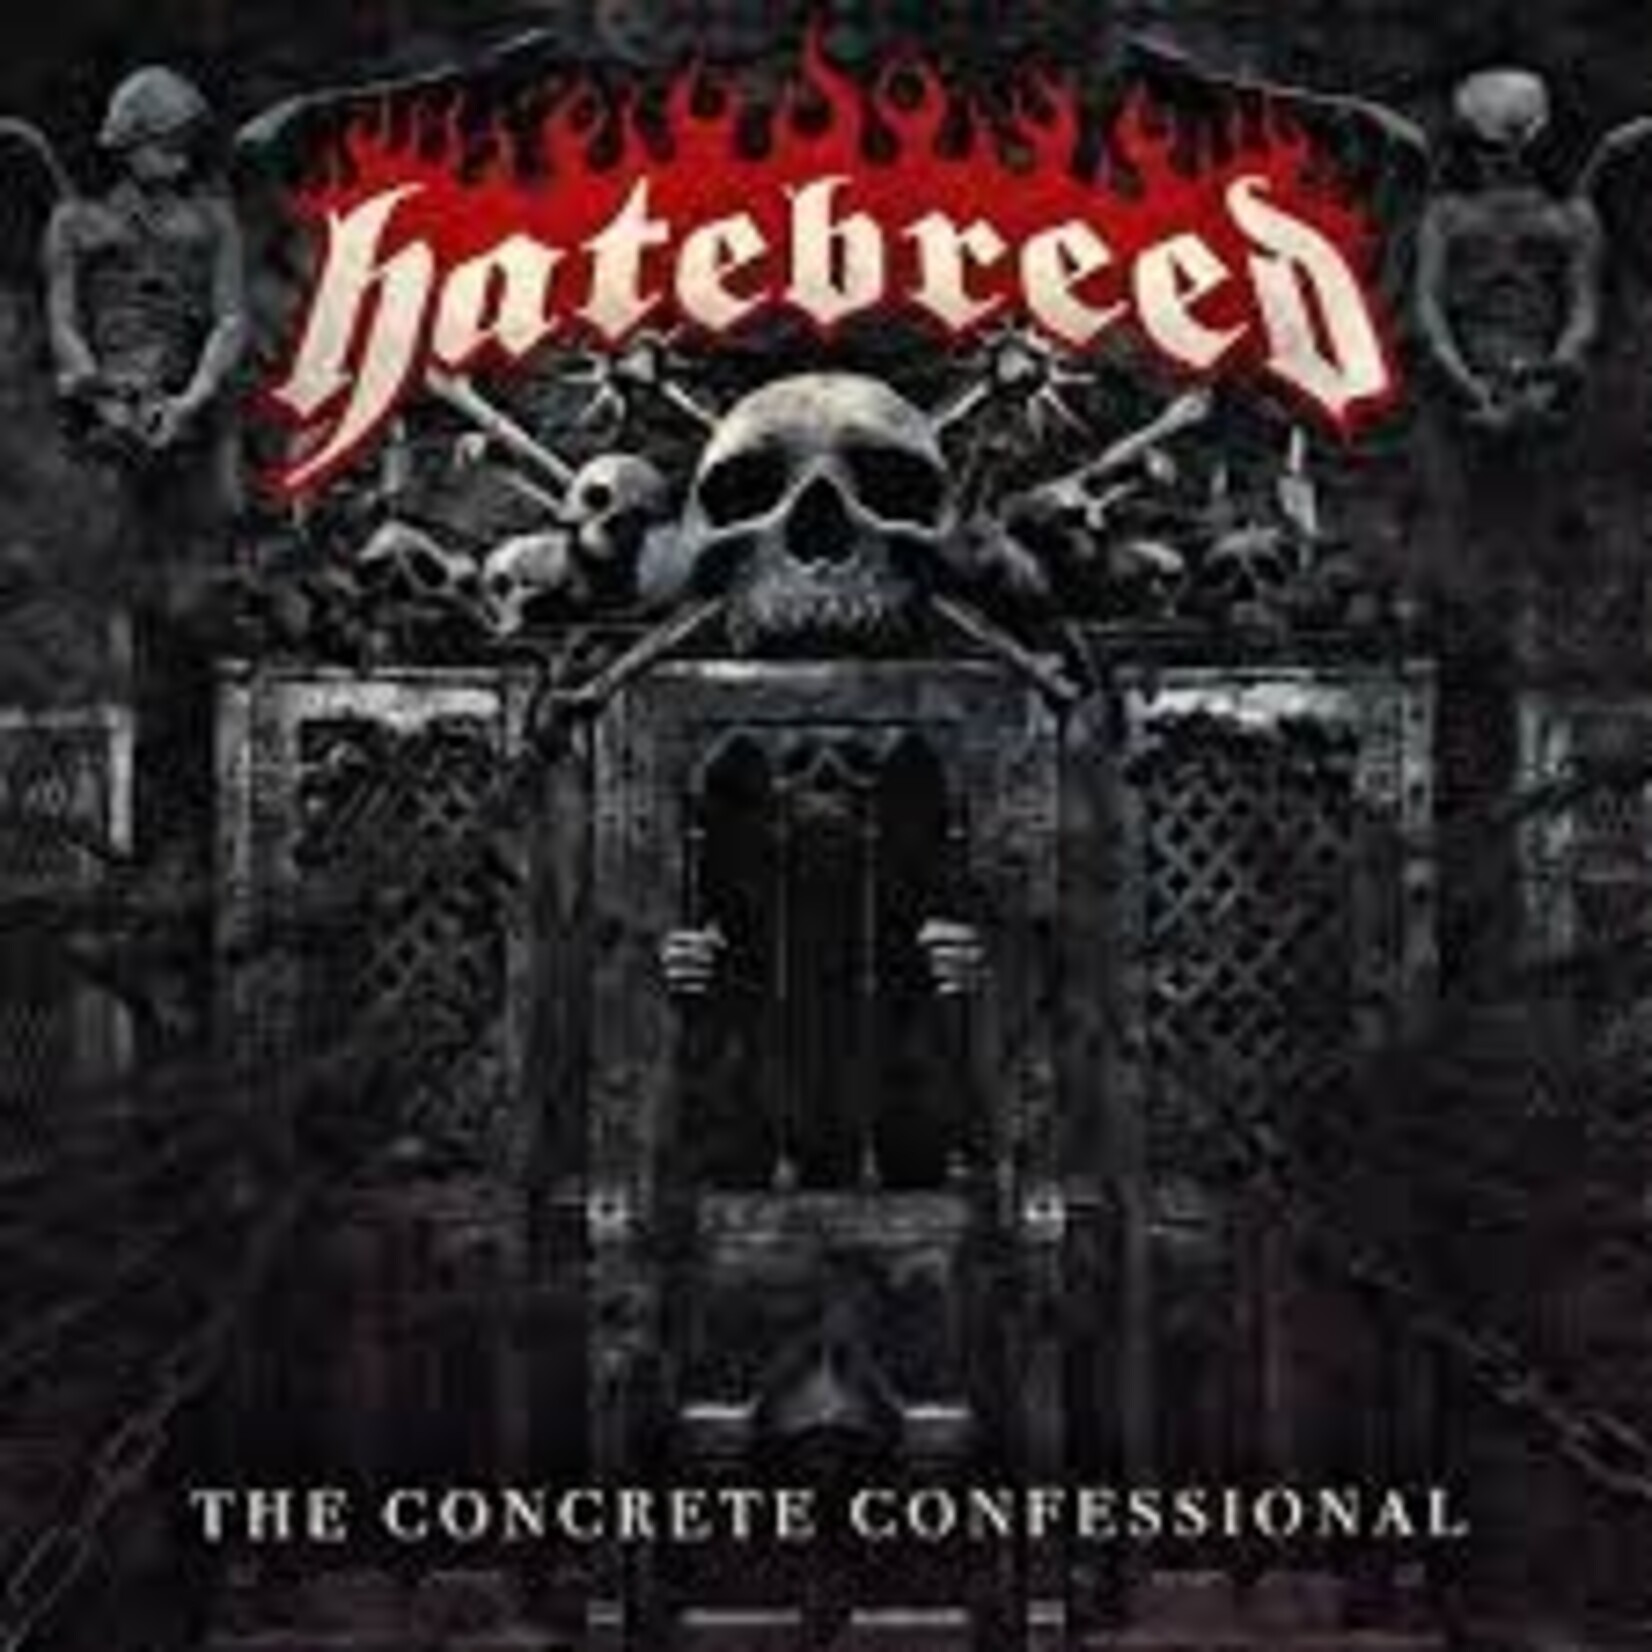 [New] Hatebreed: The Concrete Confessional (clear with red splatter) [NUCLEAR BLAST]